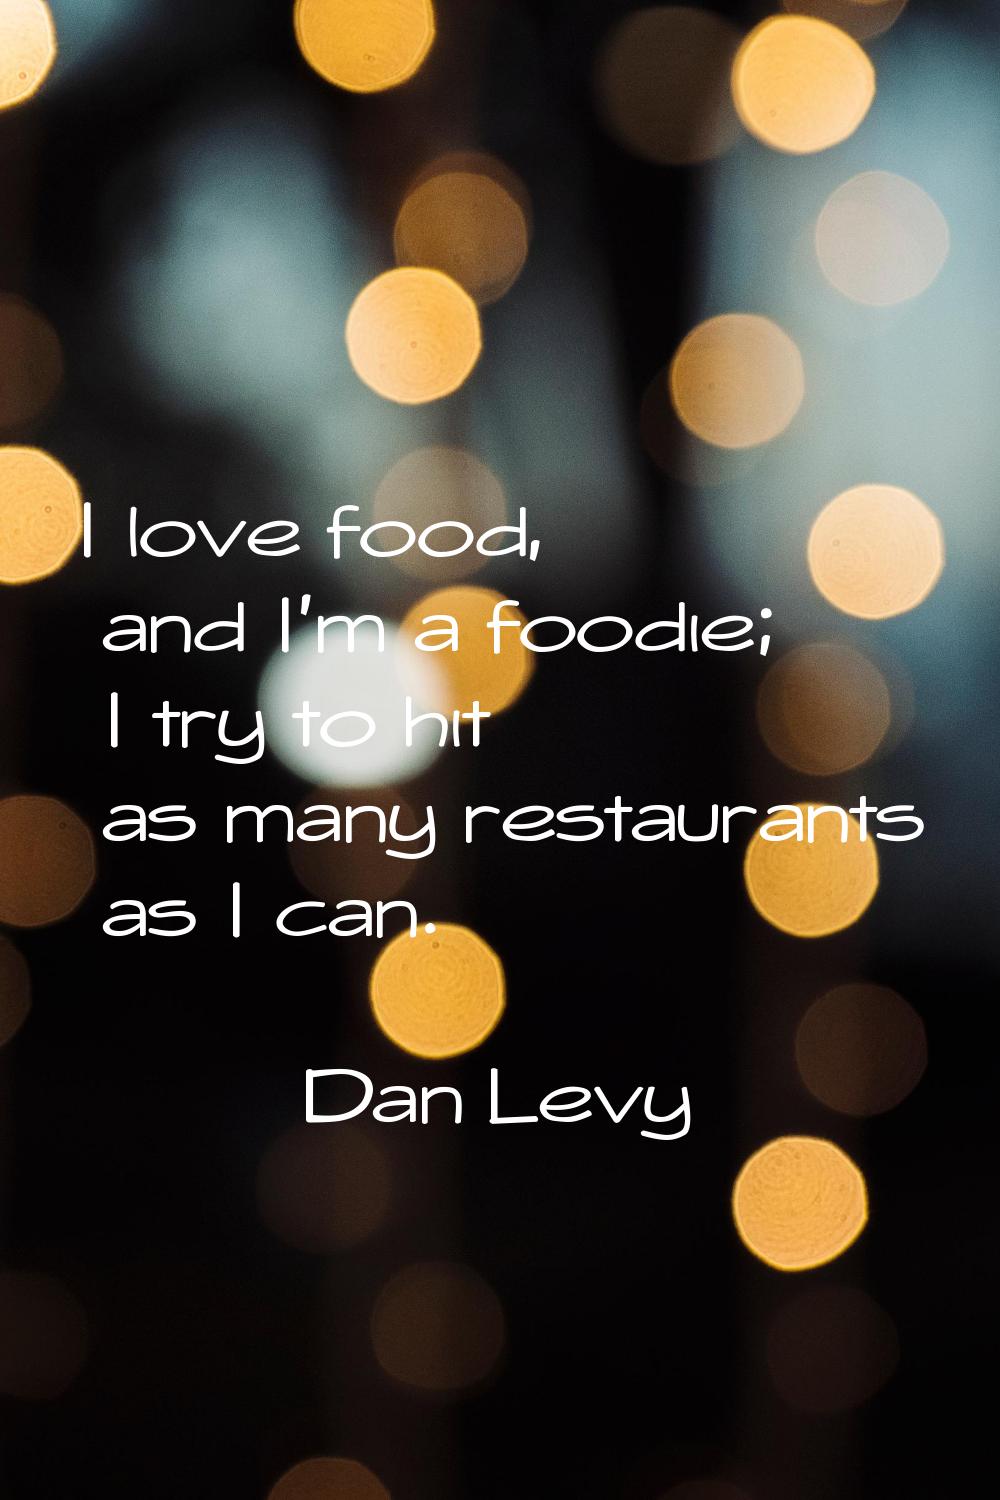 I love food, and I'm a foodie; I try to hit as many restaurants as I can.